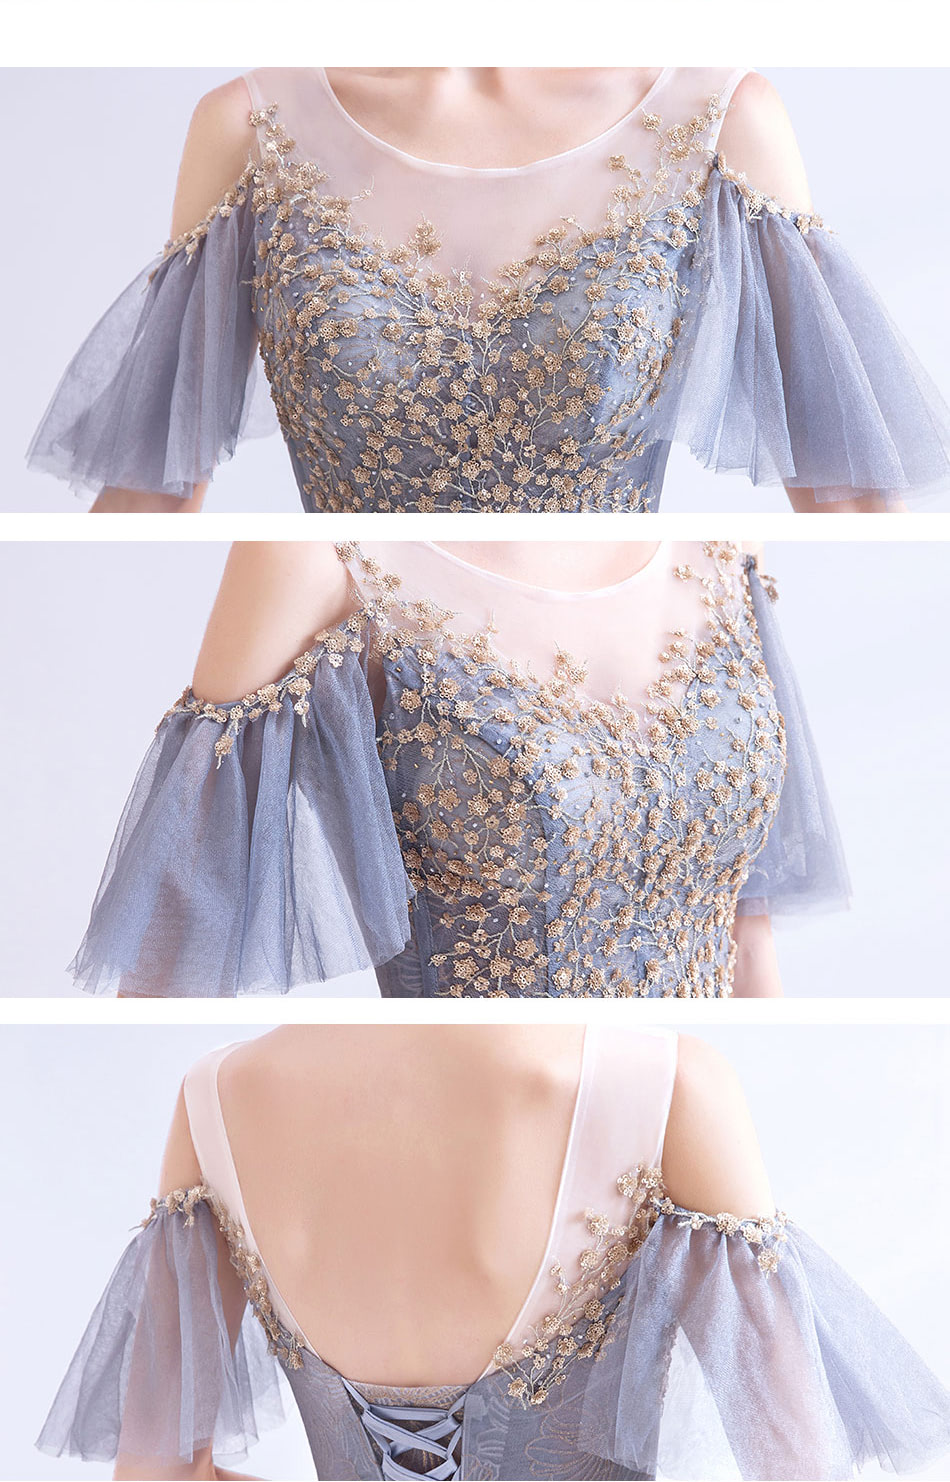 Modest-Gray-blue-Embroidery-Prom-Dress-for-Wedding-Evening-Formal-Occassions